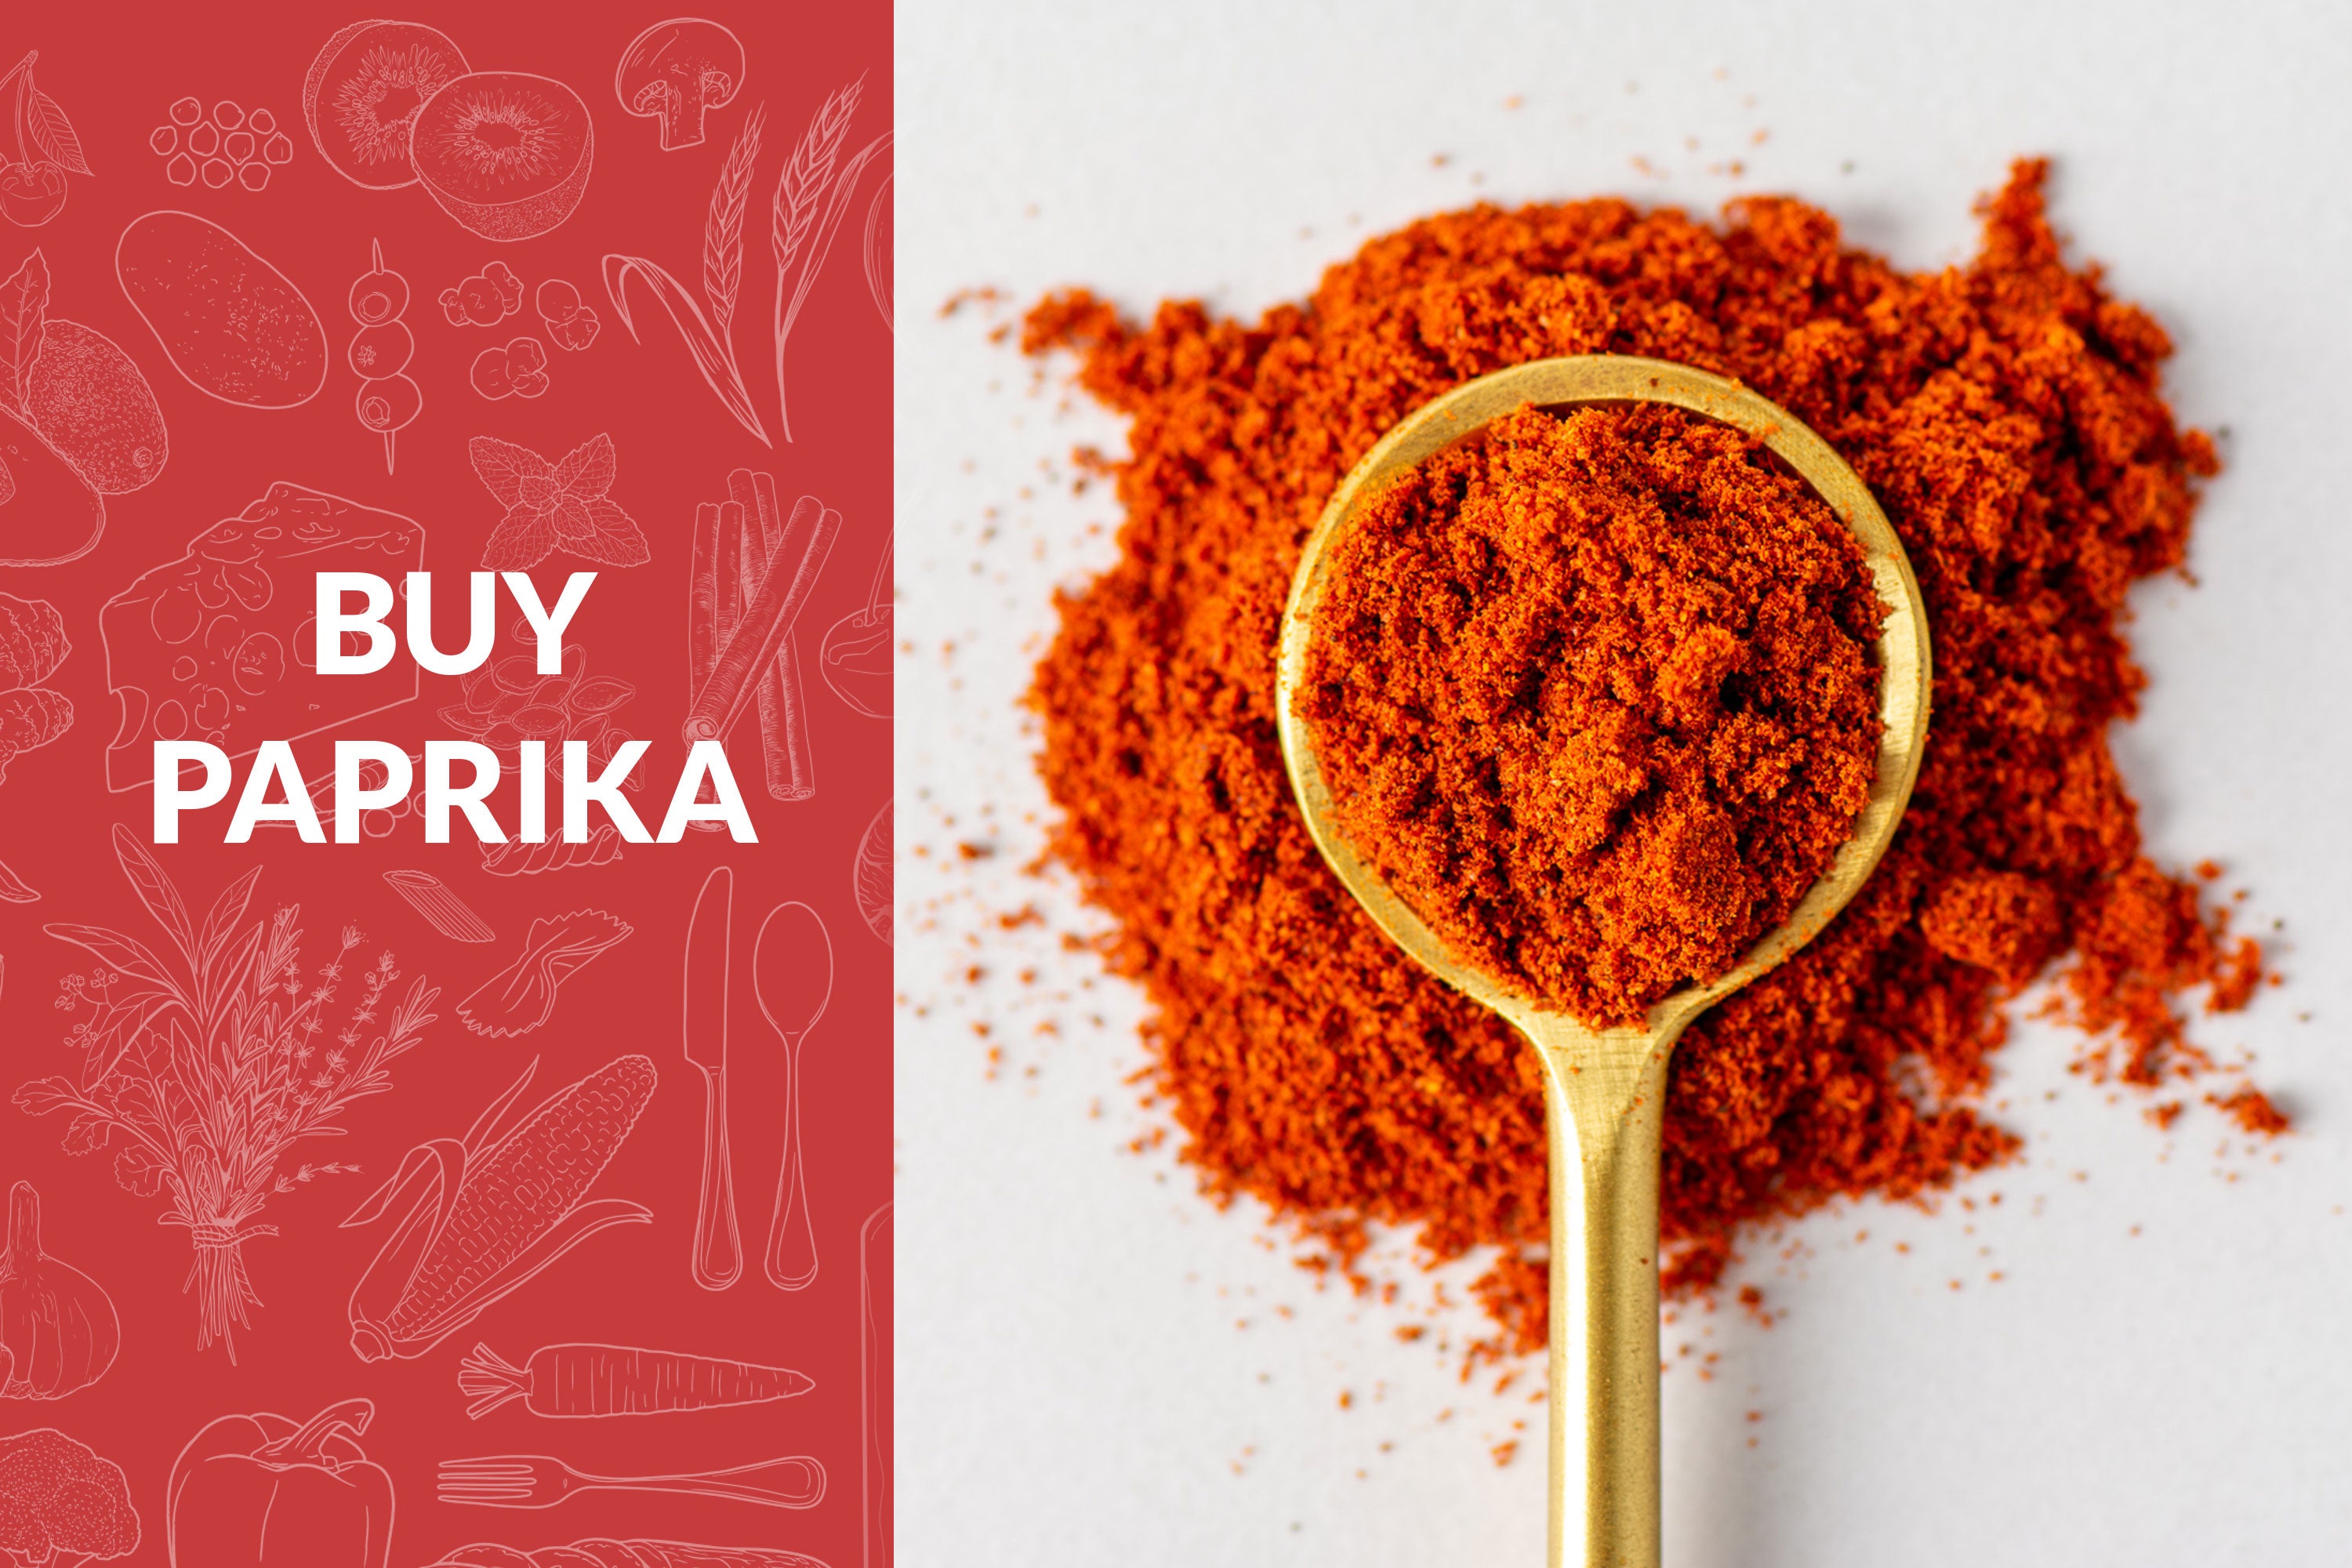 Buy Paprika with spoon of paprika on right